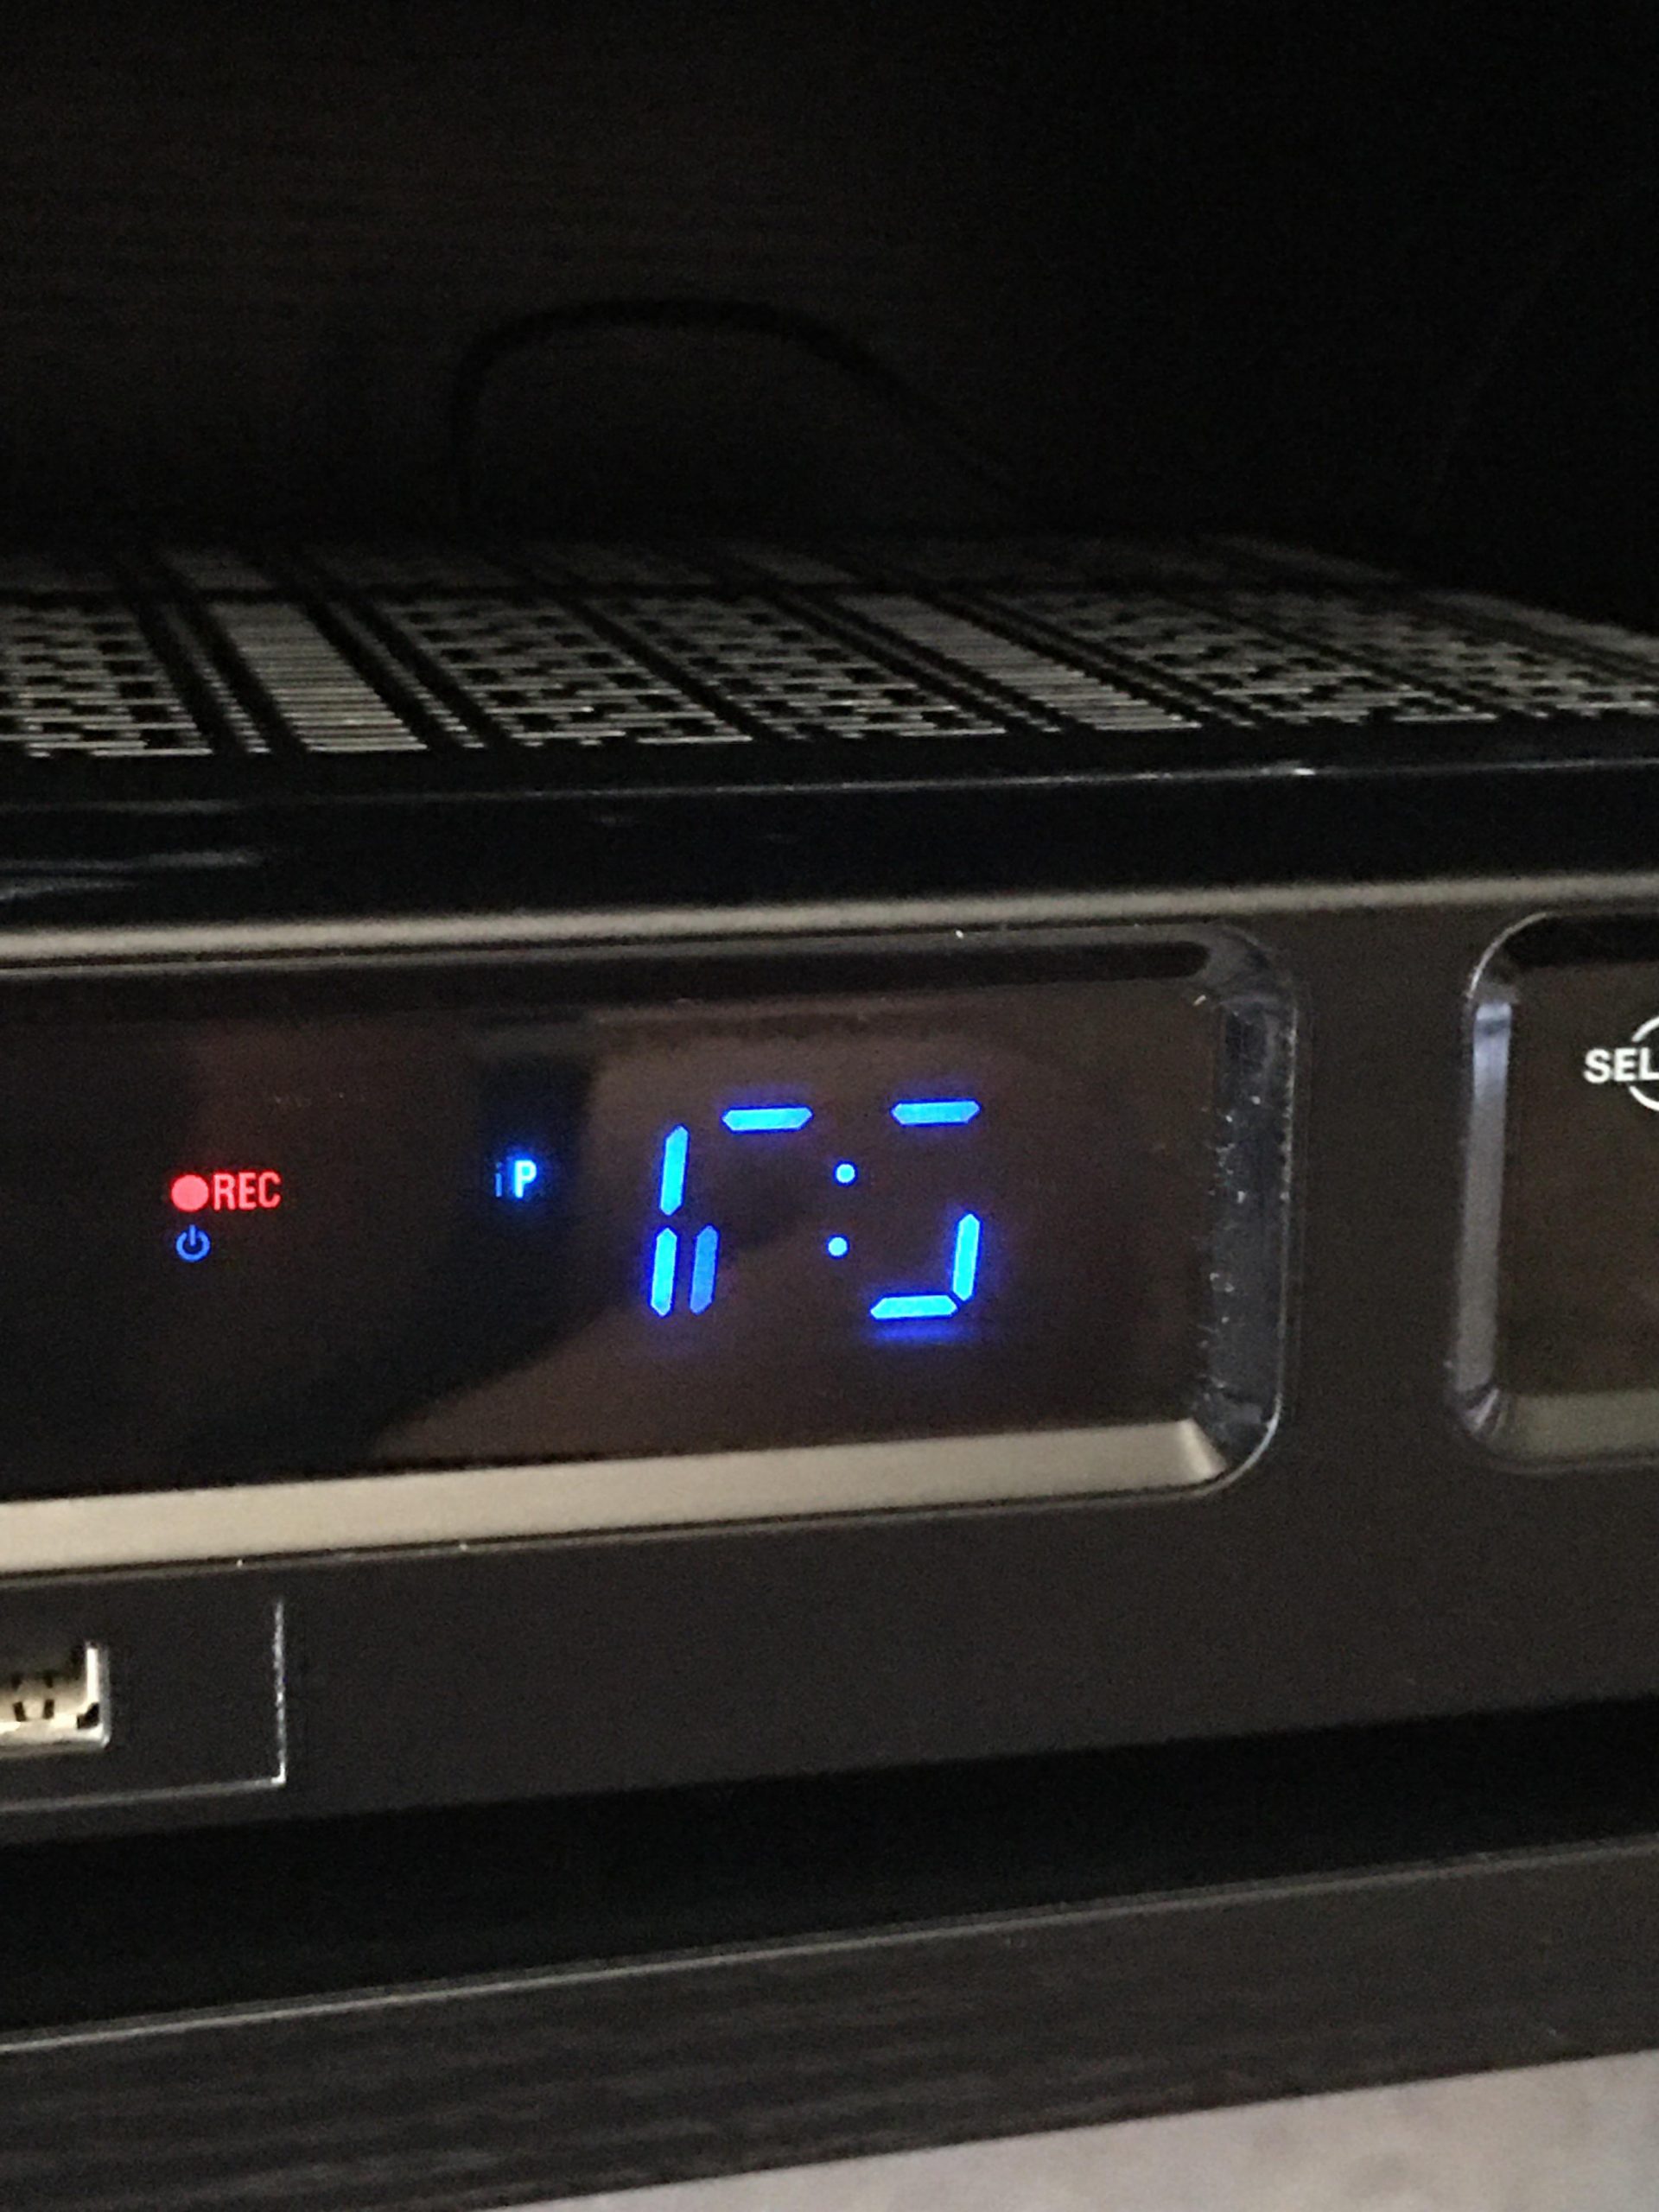 How to Set Time on Spectrum Cable Box